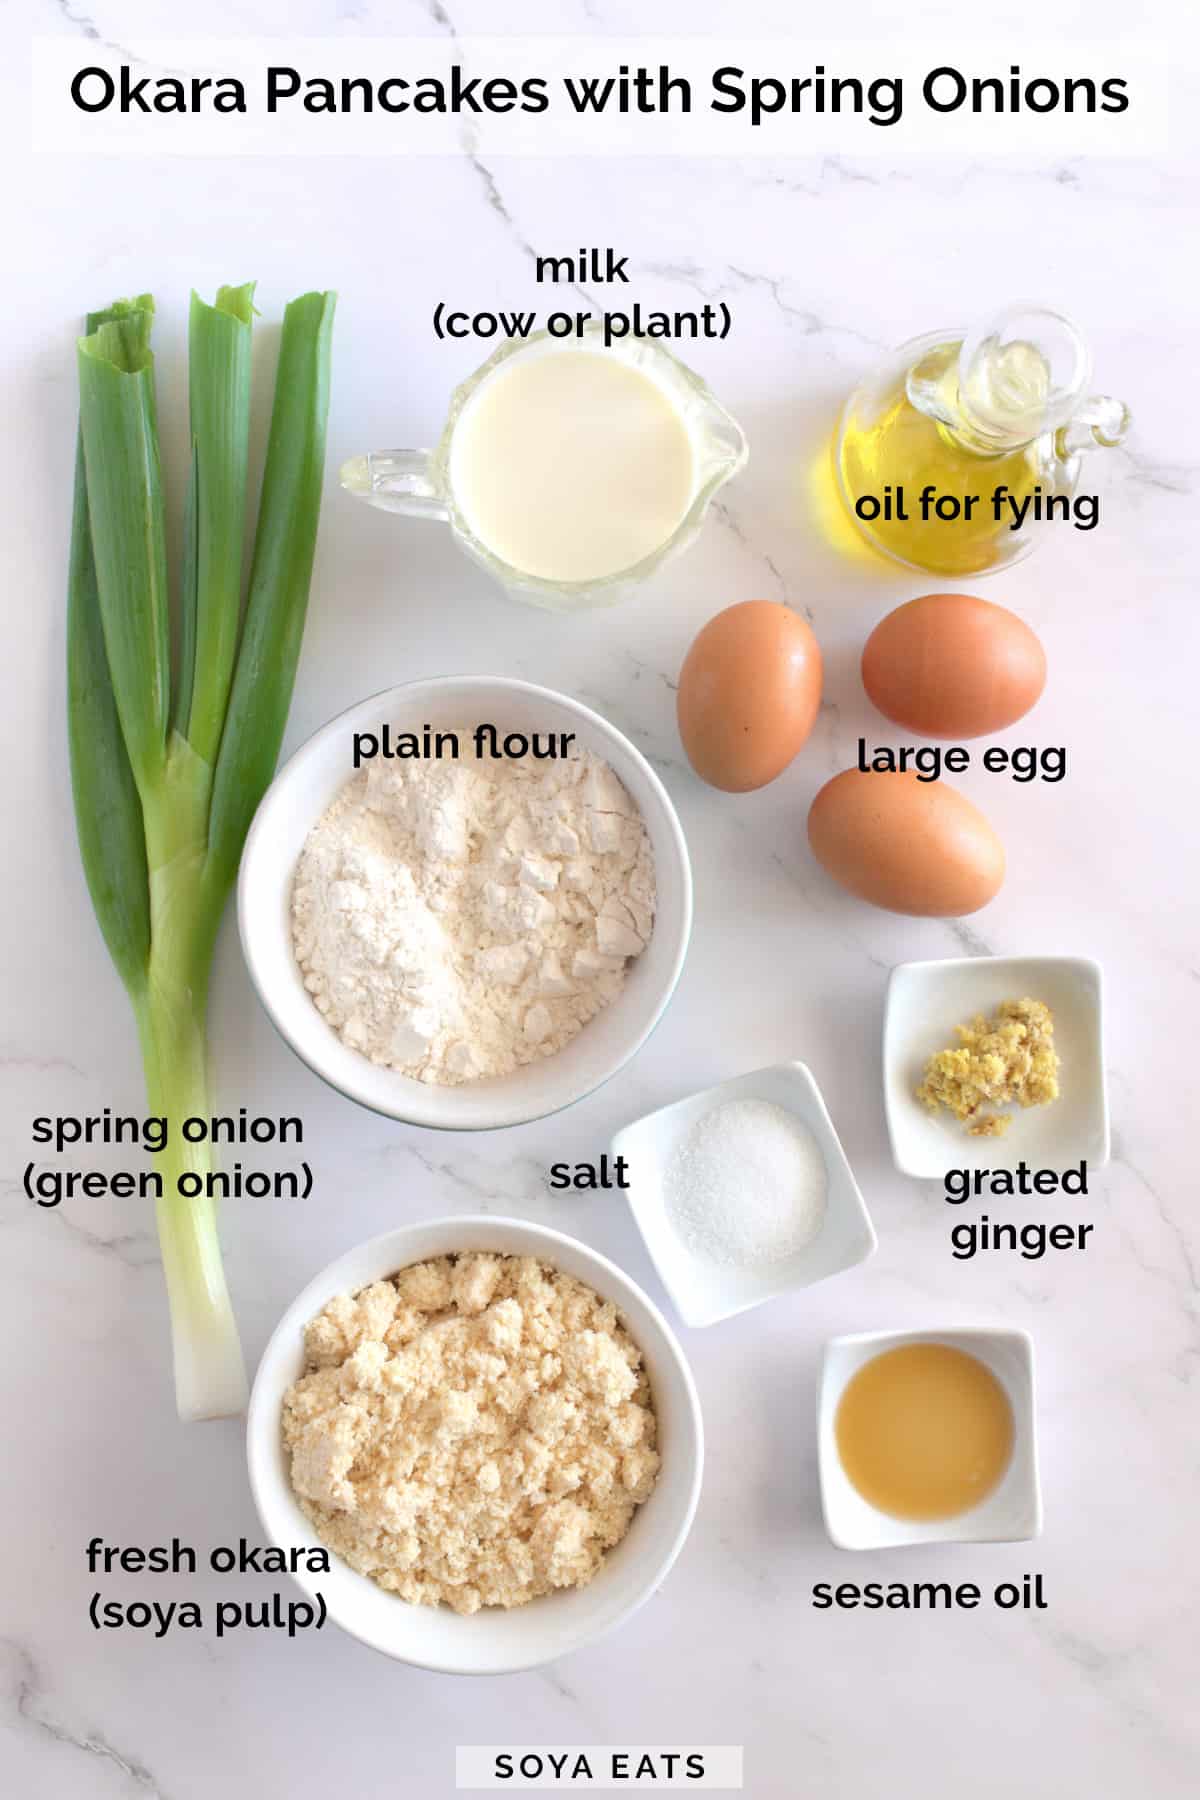 Image showing ingredients needed to make green onion pancakes.